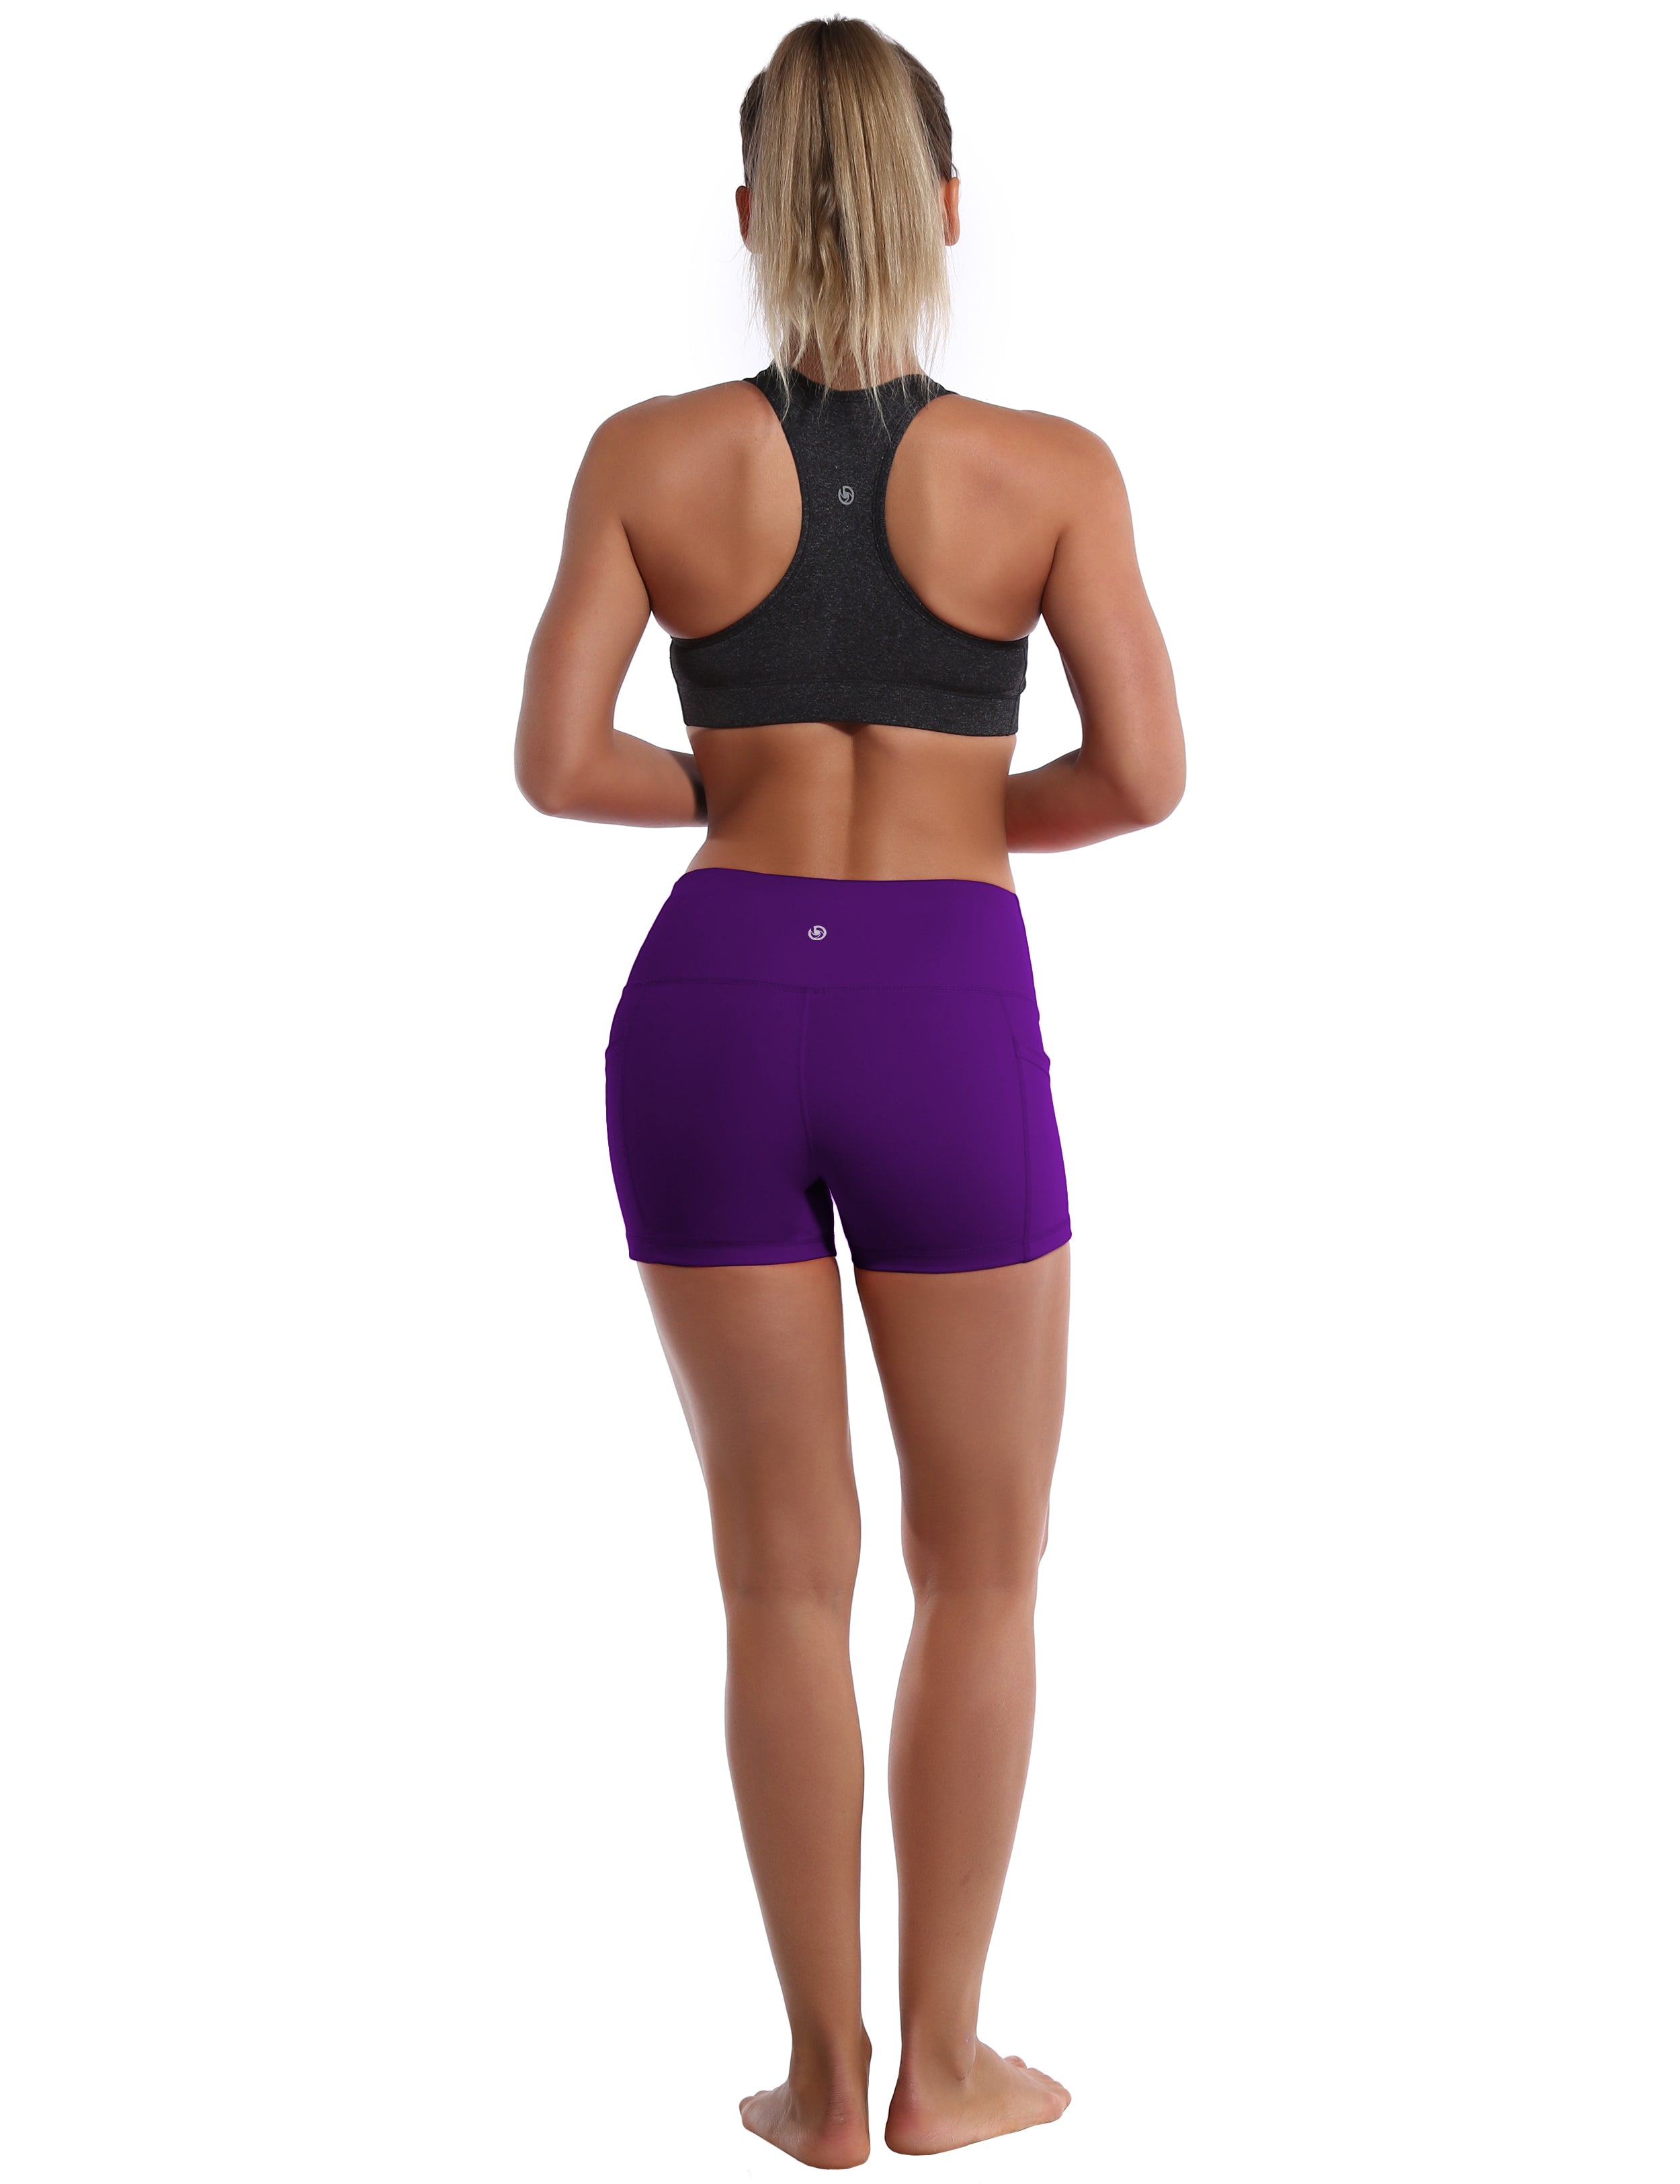 2.5" Side Pockets Yoga Shorts eggplantpurple Sleek, soft, smooth and totally comfortable: our newest sexy style is here. Softest-ever fabric High elasticity High density 4-way stretch Fabric doesn't attract lint easily No see-through Moisture-wicking Machine wash 78% Polyester, 22% Spandex